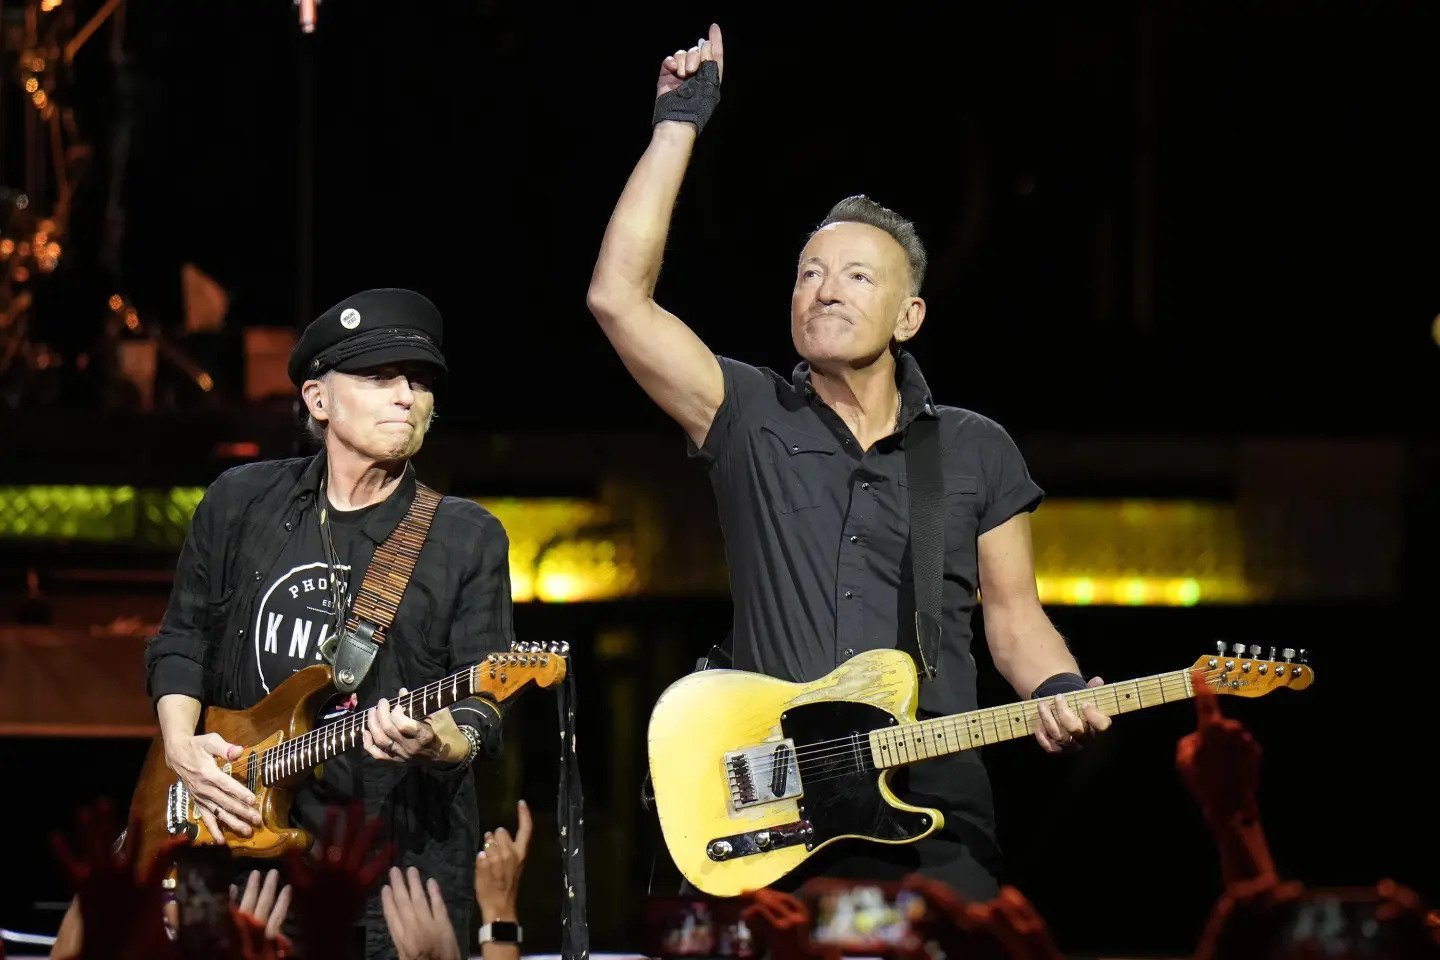 Springsteen to bring international tour to Gillette Stadium for 2 nights | ABC6